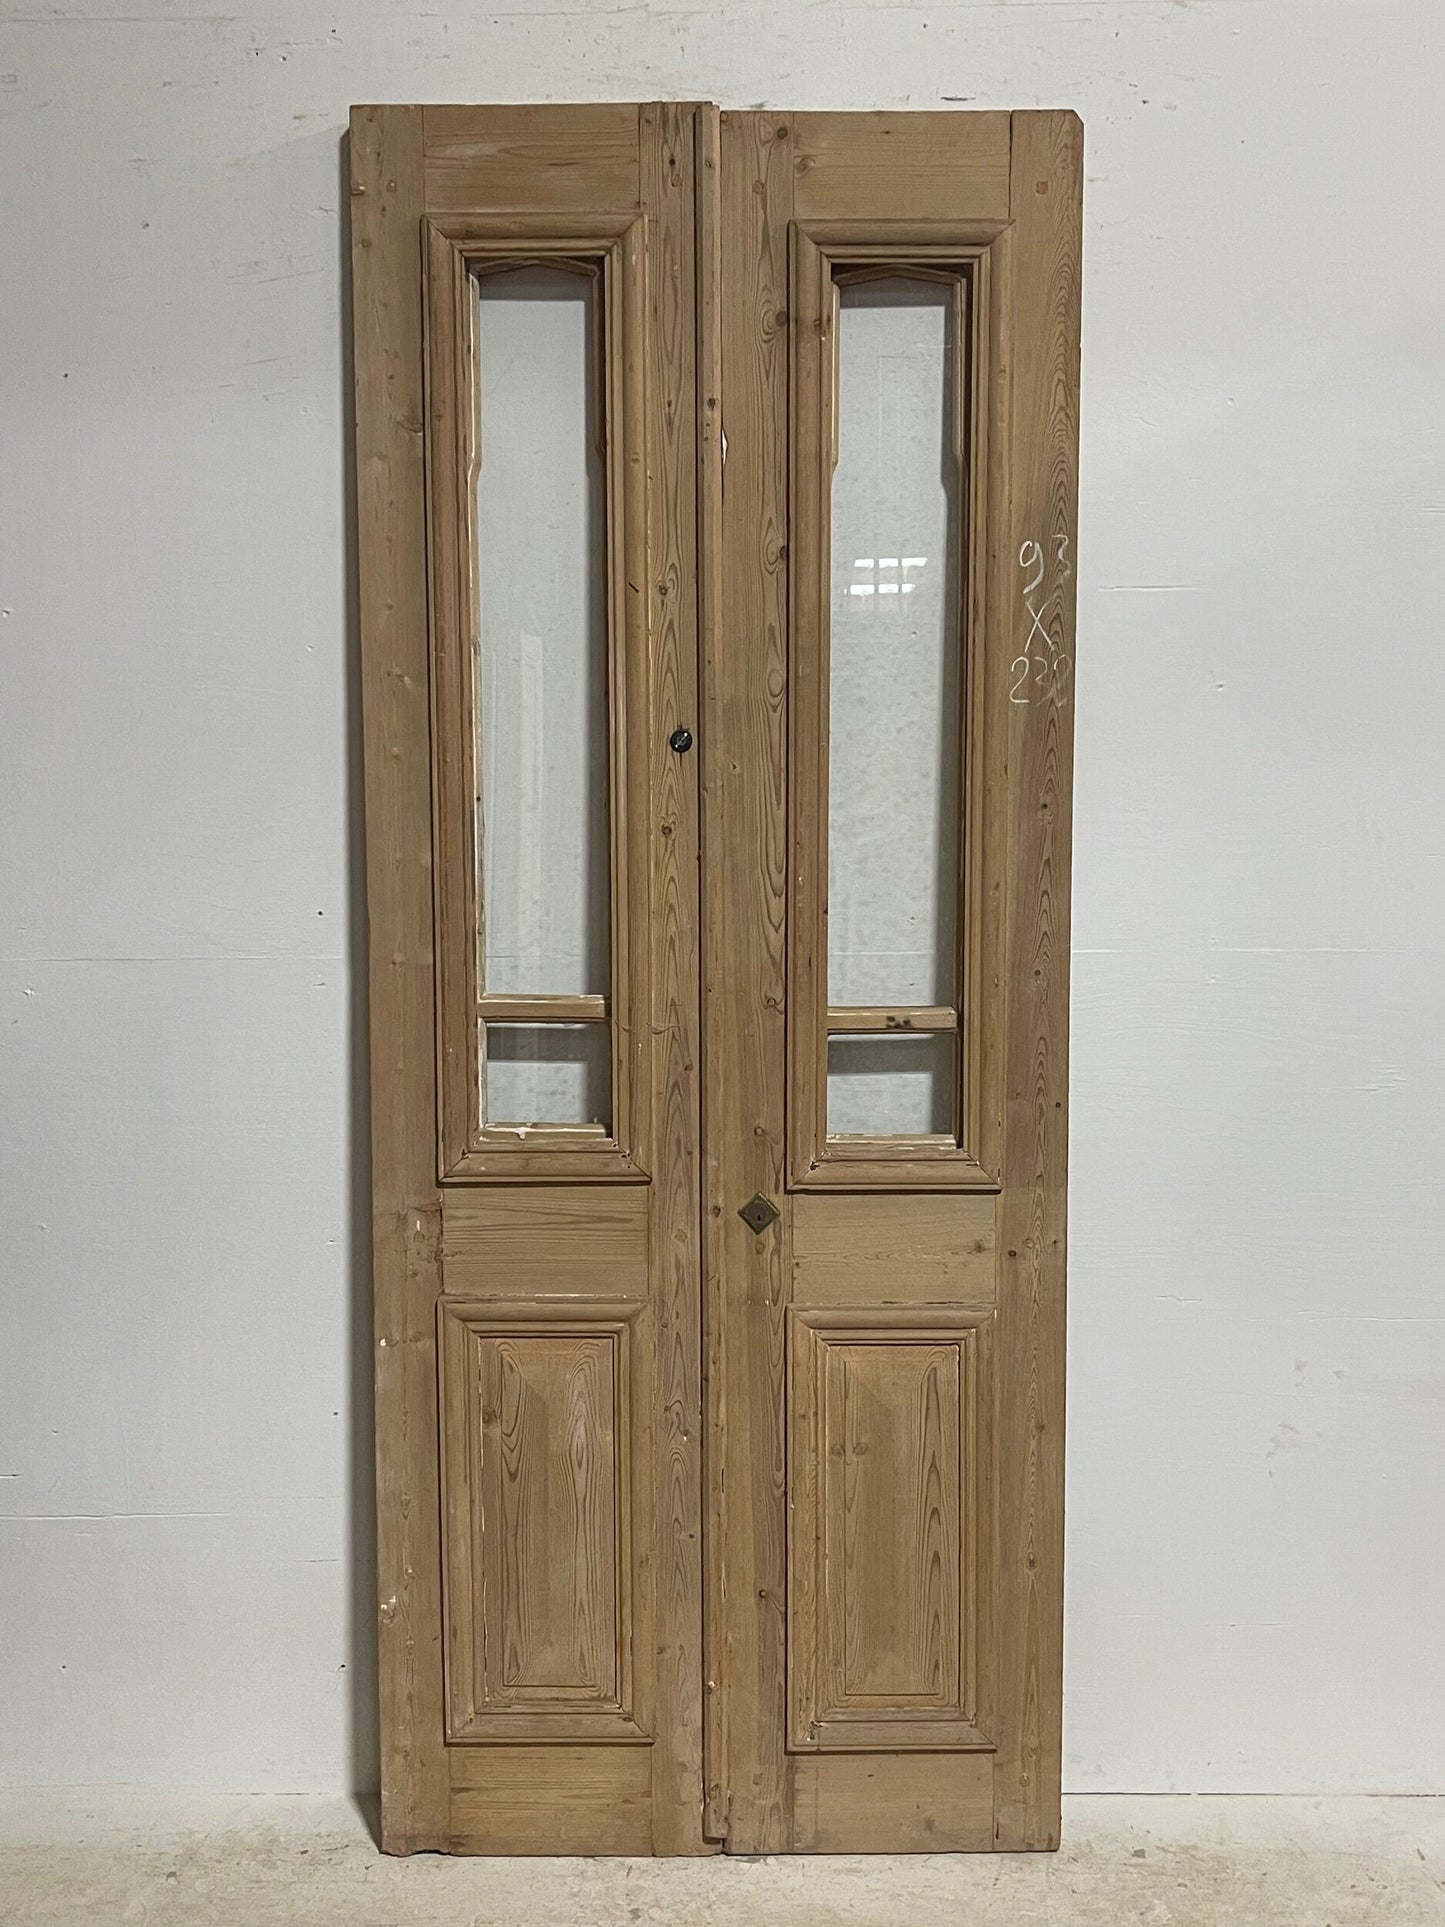 Antique French doors with glass (90.5x36.75) H0099s